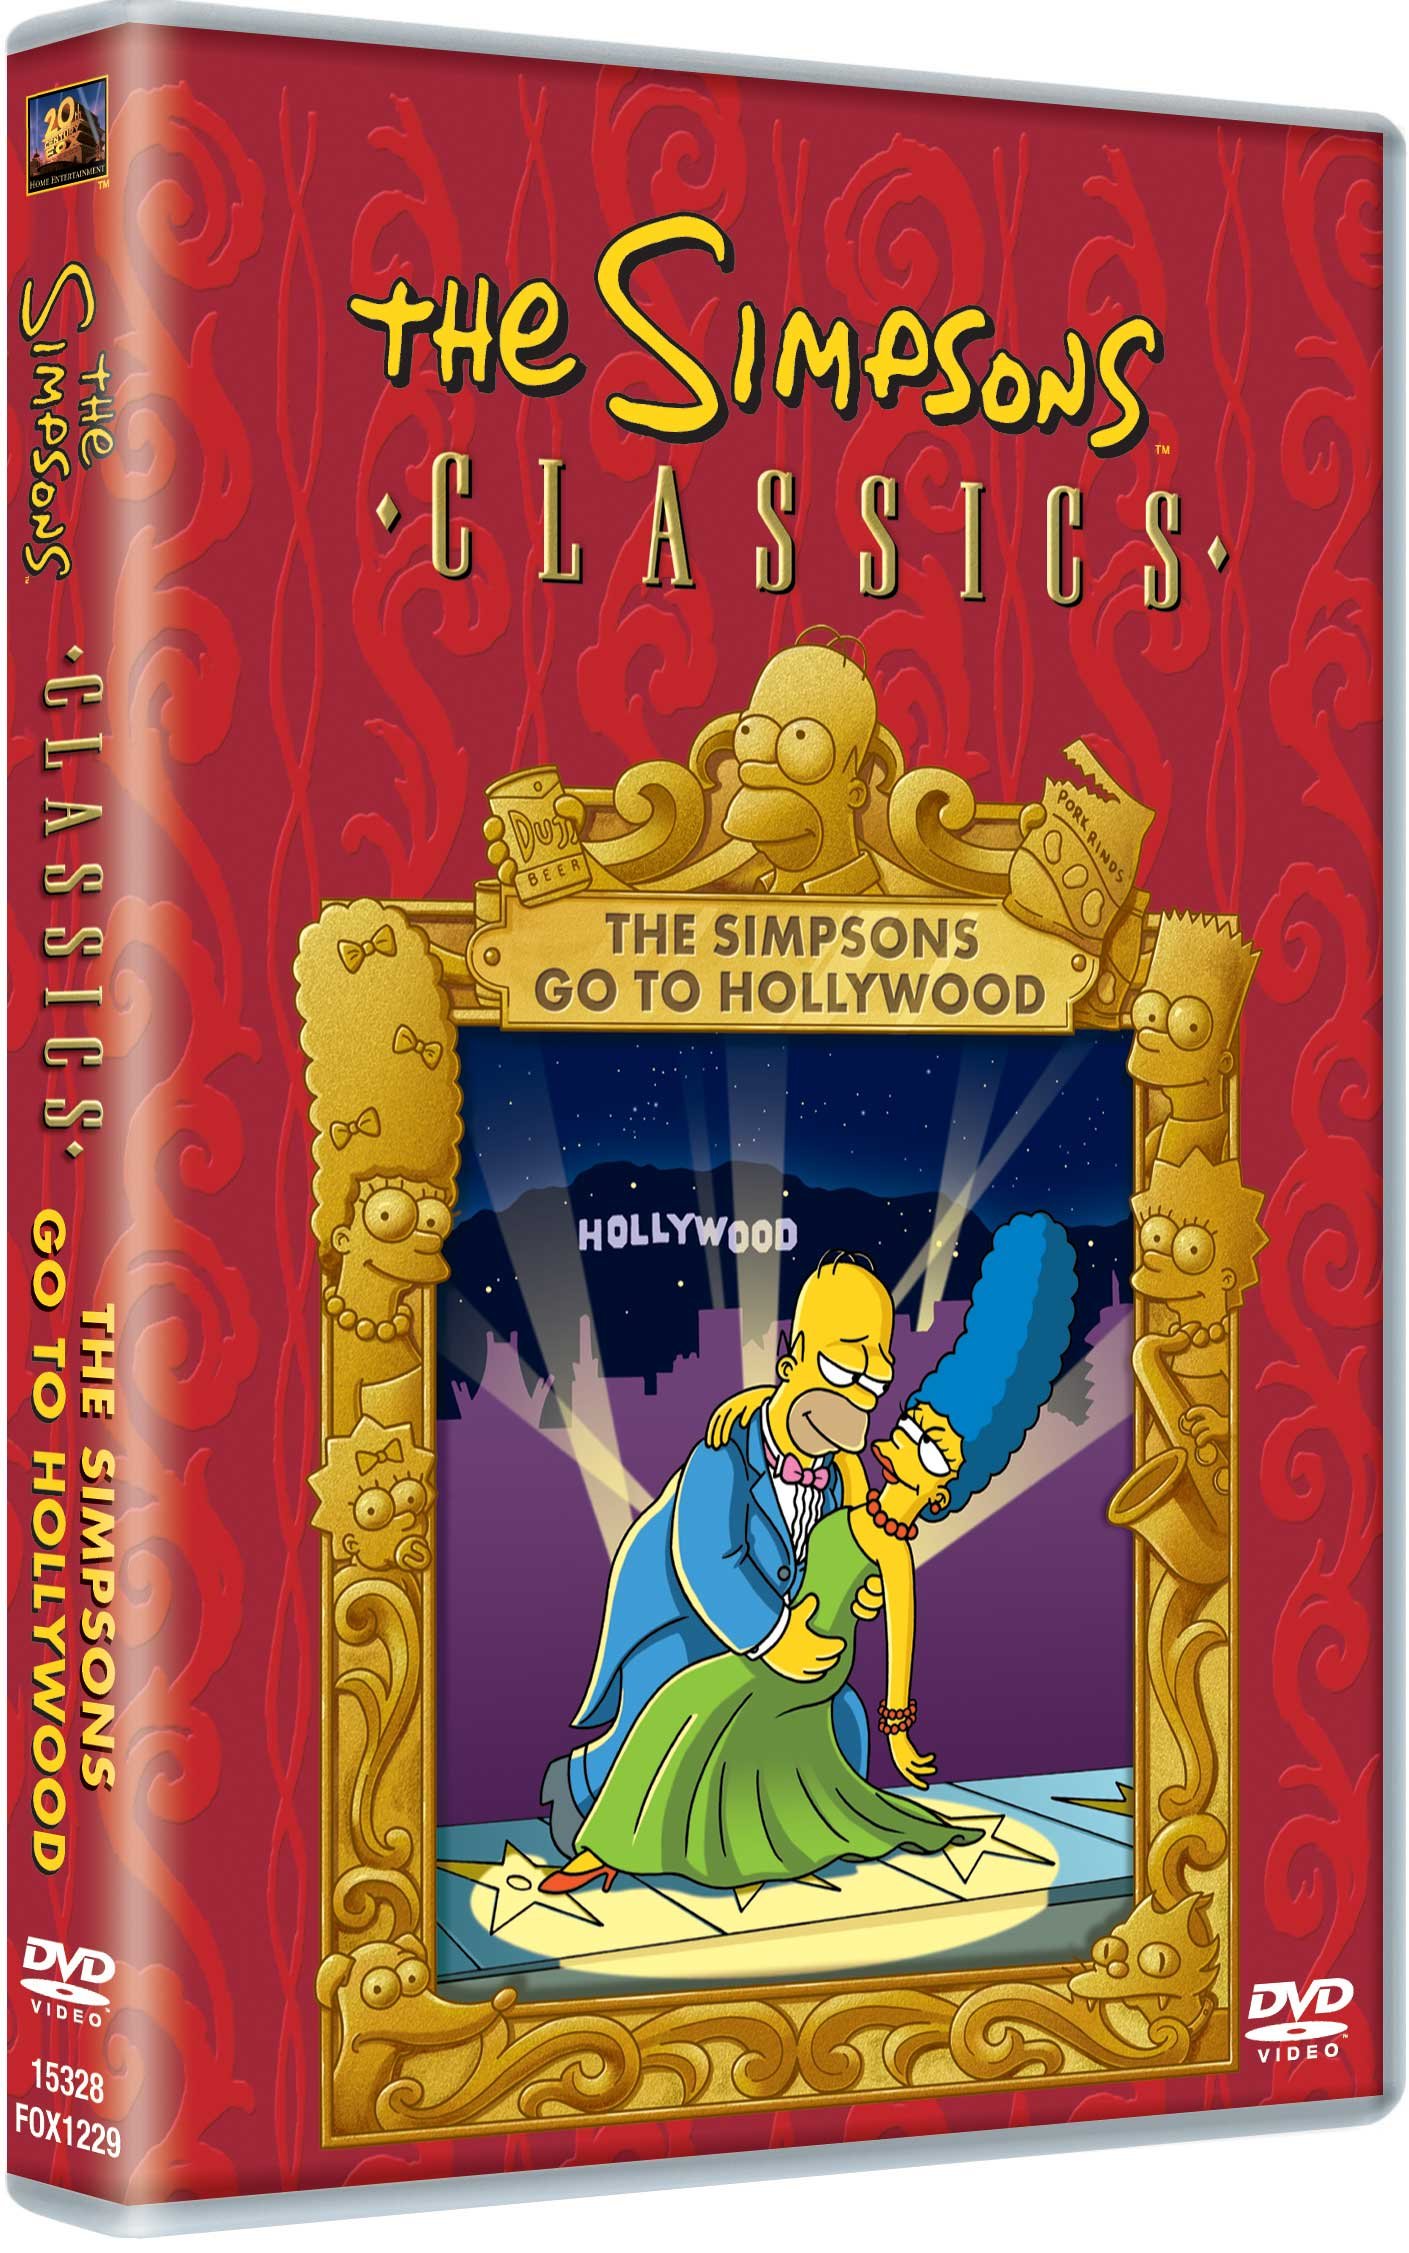 the-simpsons-classics-the-simpsons-go-to-hollywood-movie-purchase-or